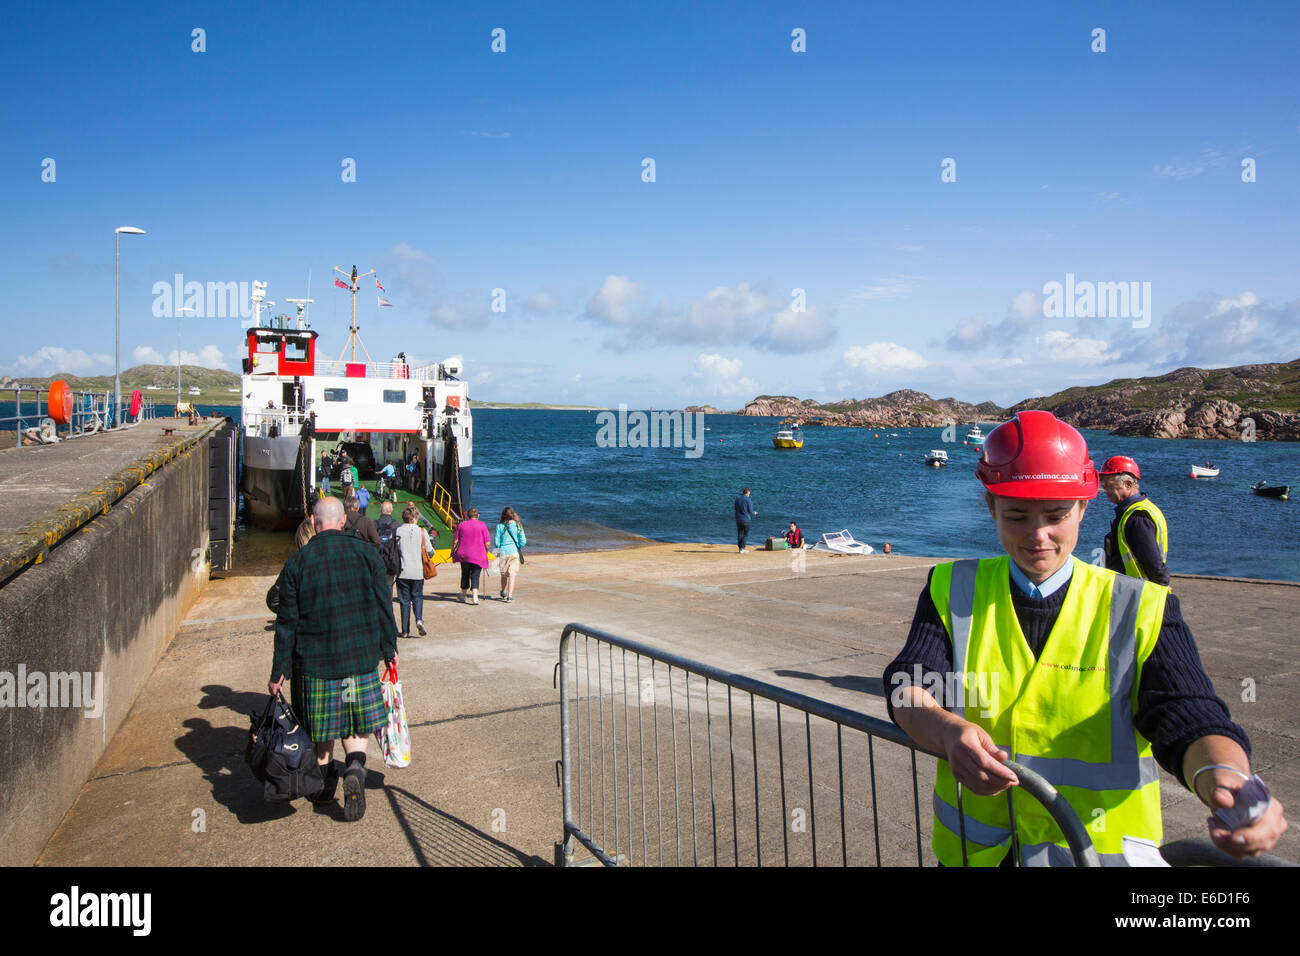 Passengers queing for the Iona ferry at Fionnphort Isle of Mull, Scotland, UK, looking towards Iona. Stock Photo